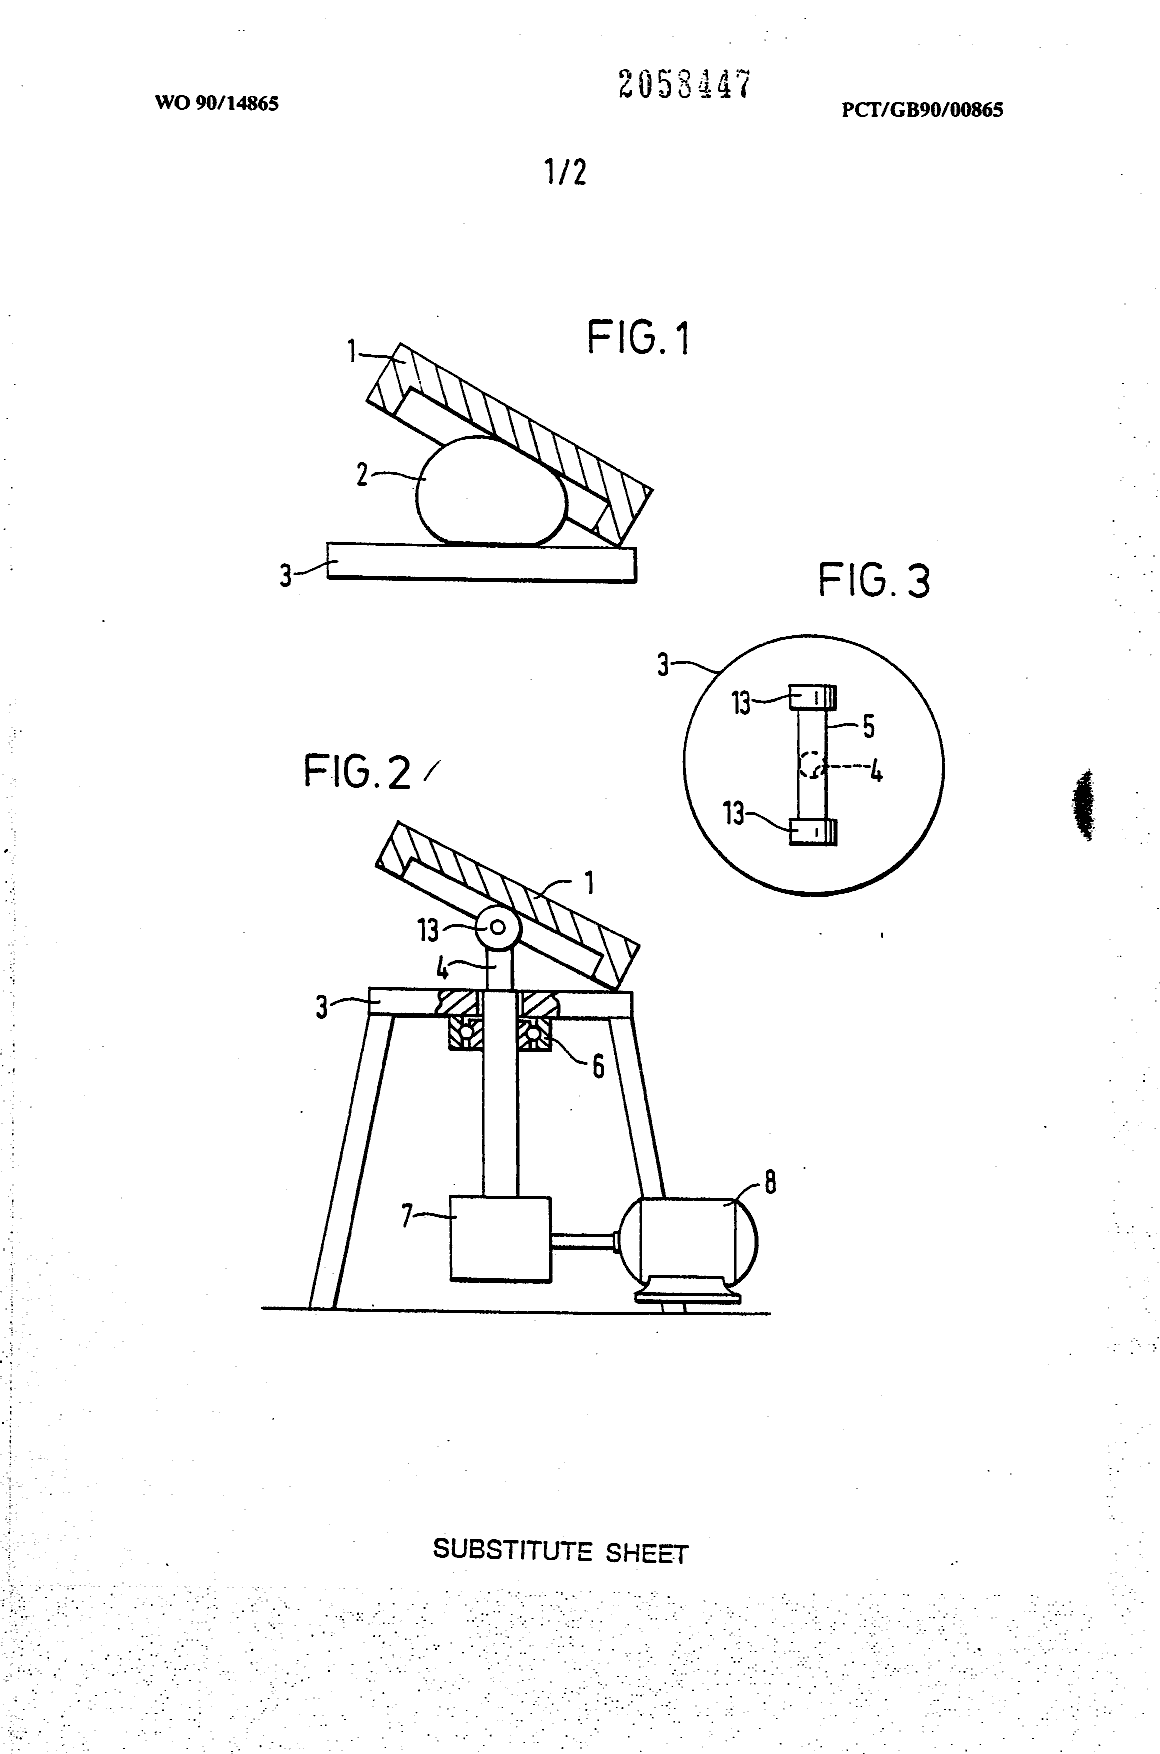 Canadian Patent Document 2058447. Drawings 19891208. Image 1 of 2